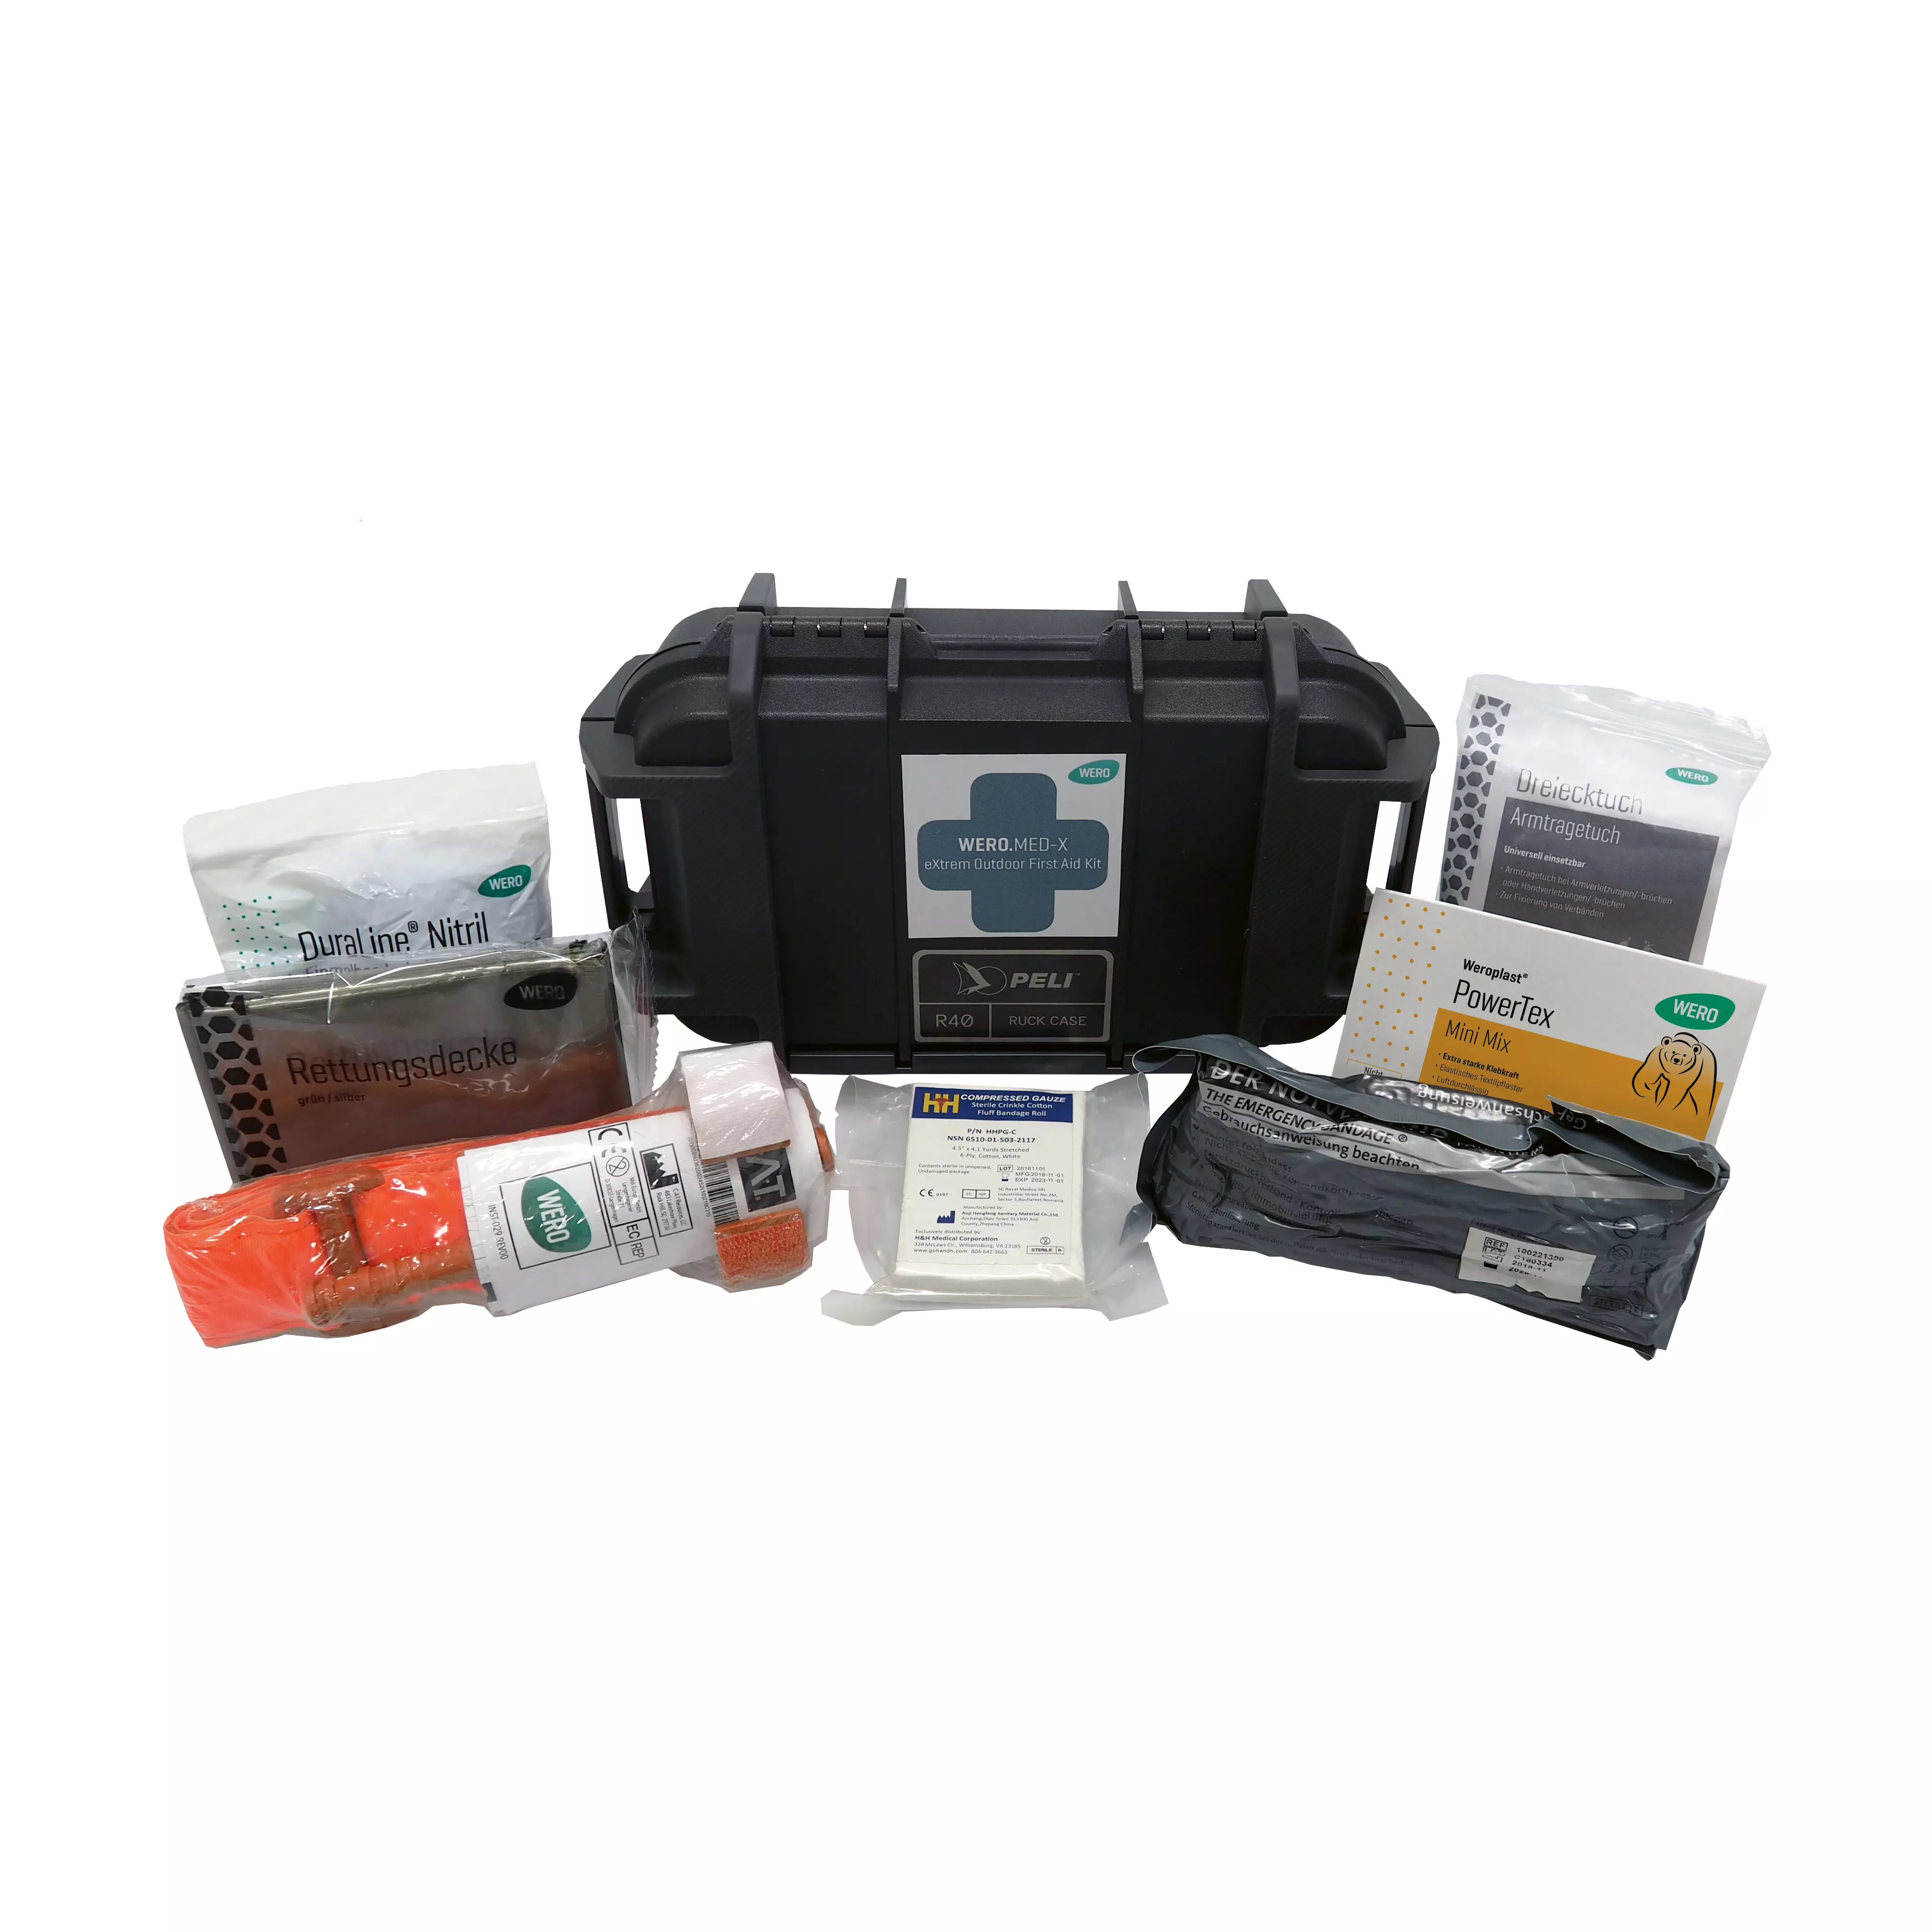 WERO MED-X® eXtrem Outdoor First Aid Kit